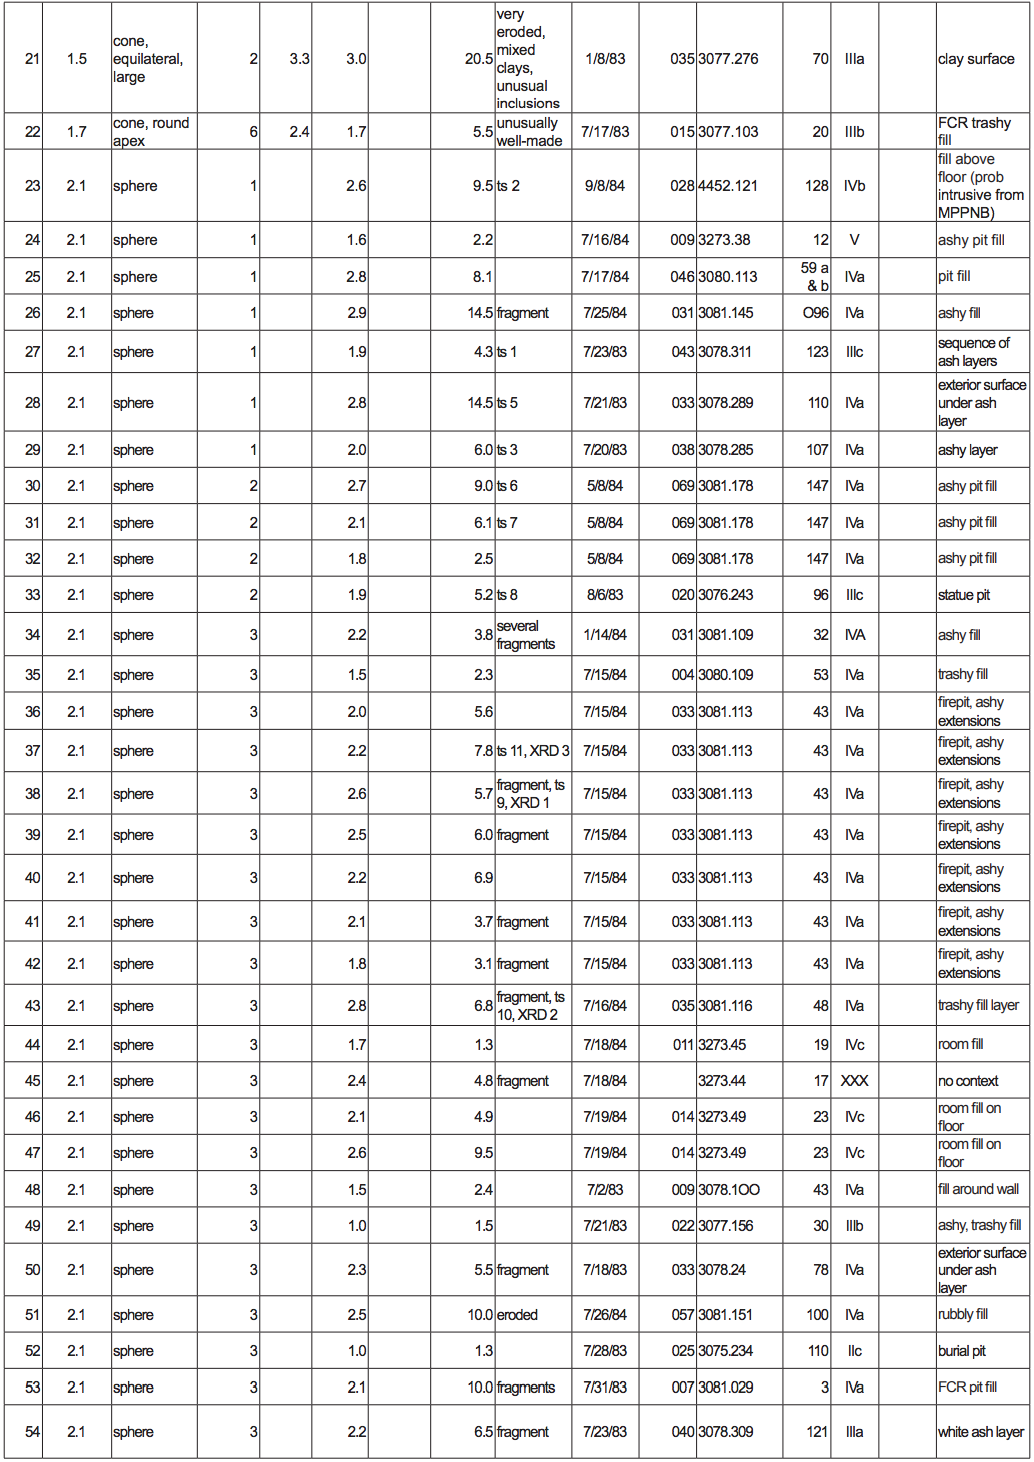 Objects 21-54 in the 'Ain Ghazal Token Catalogue, By Type And Subtype table